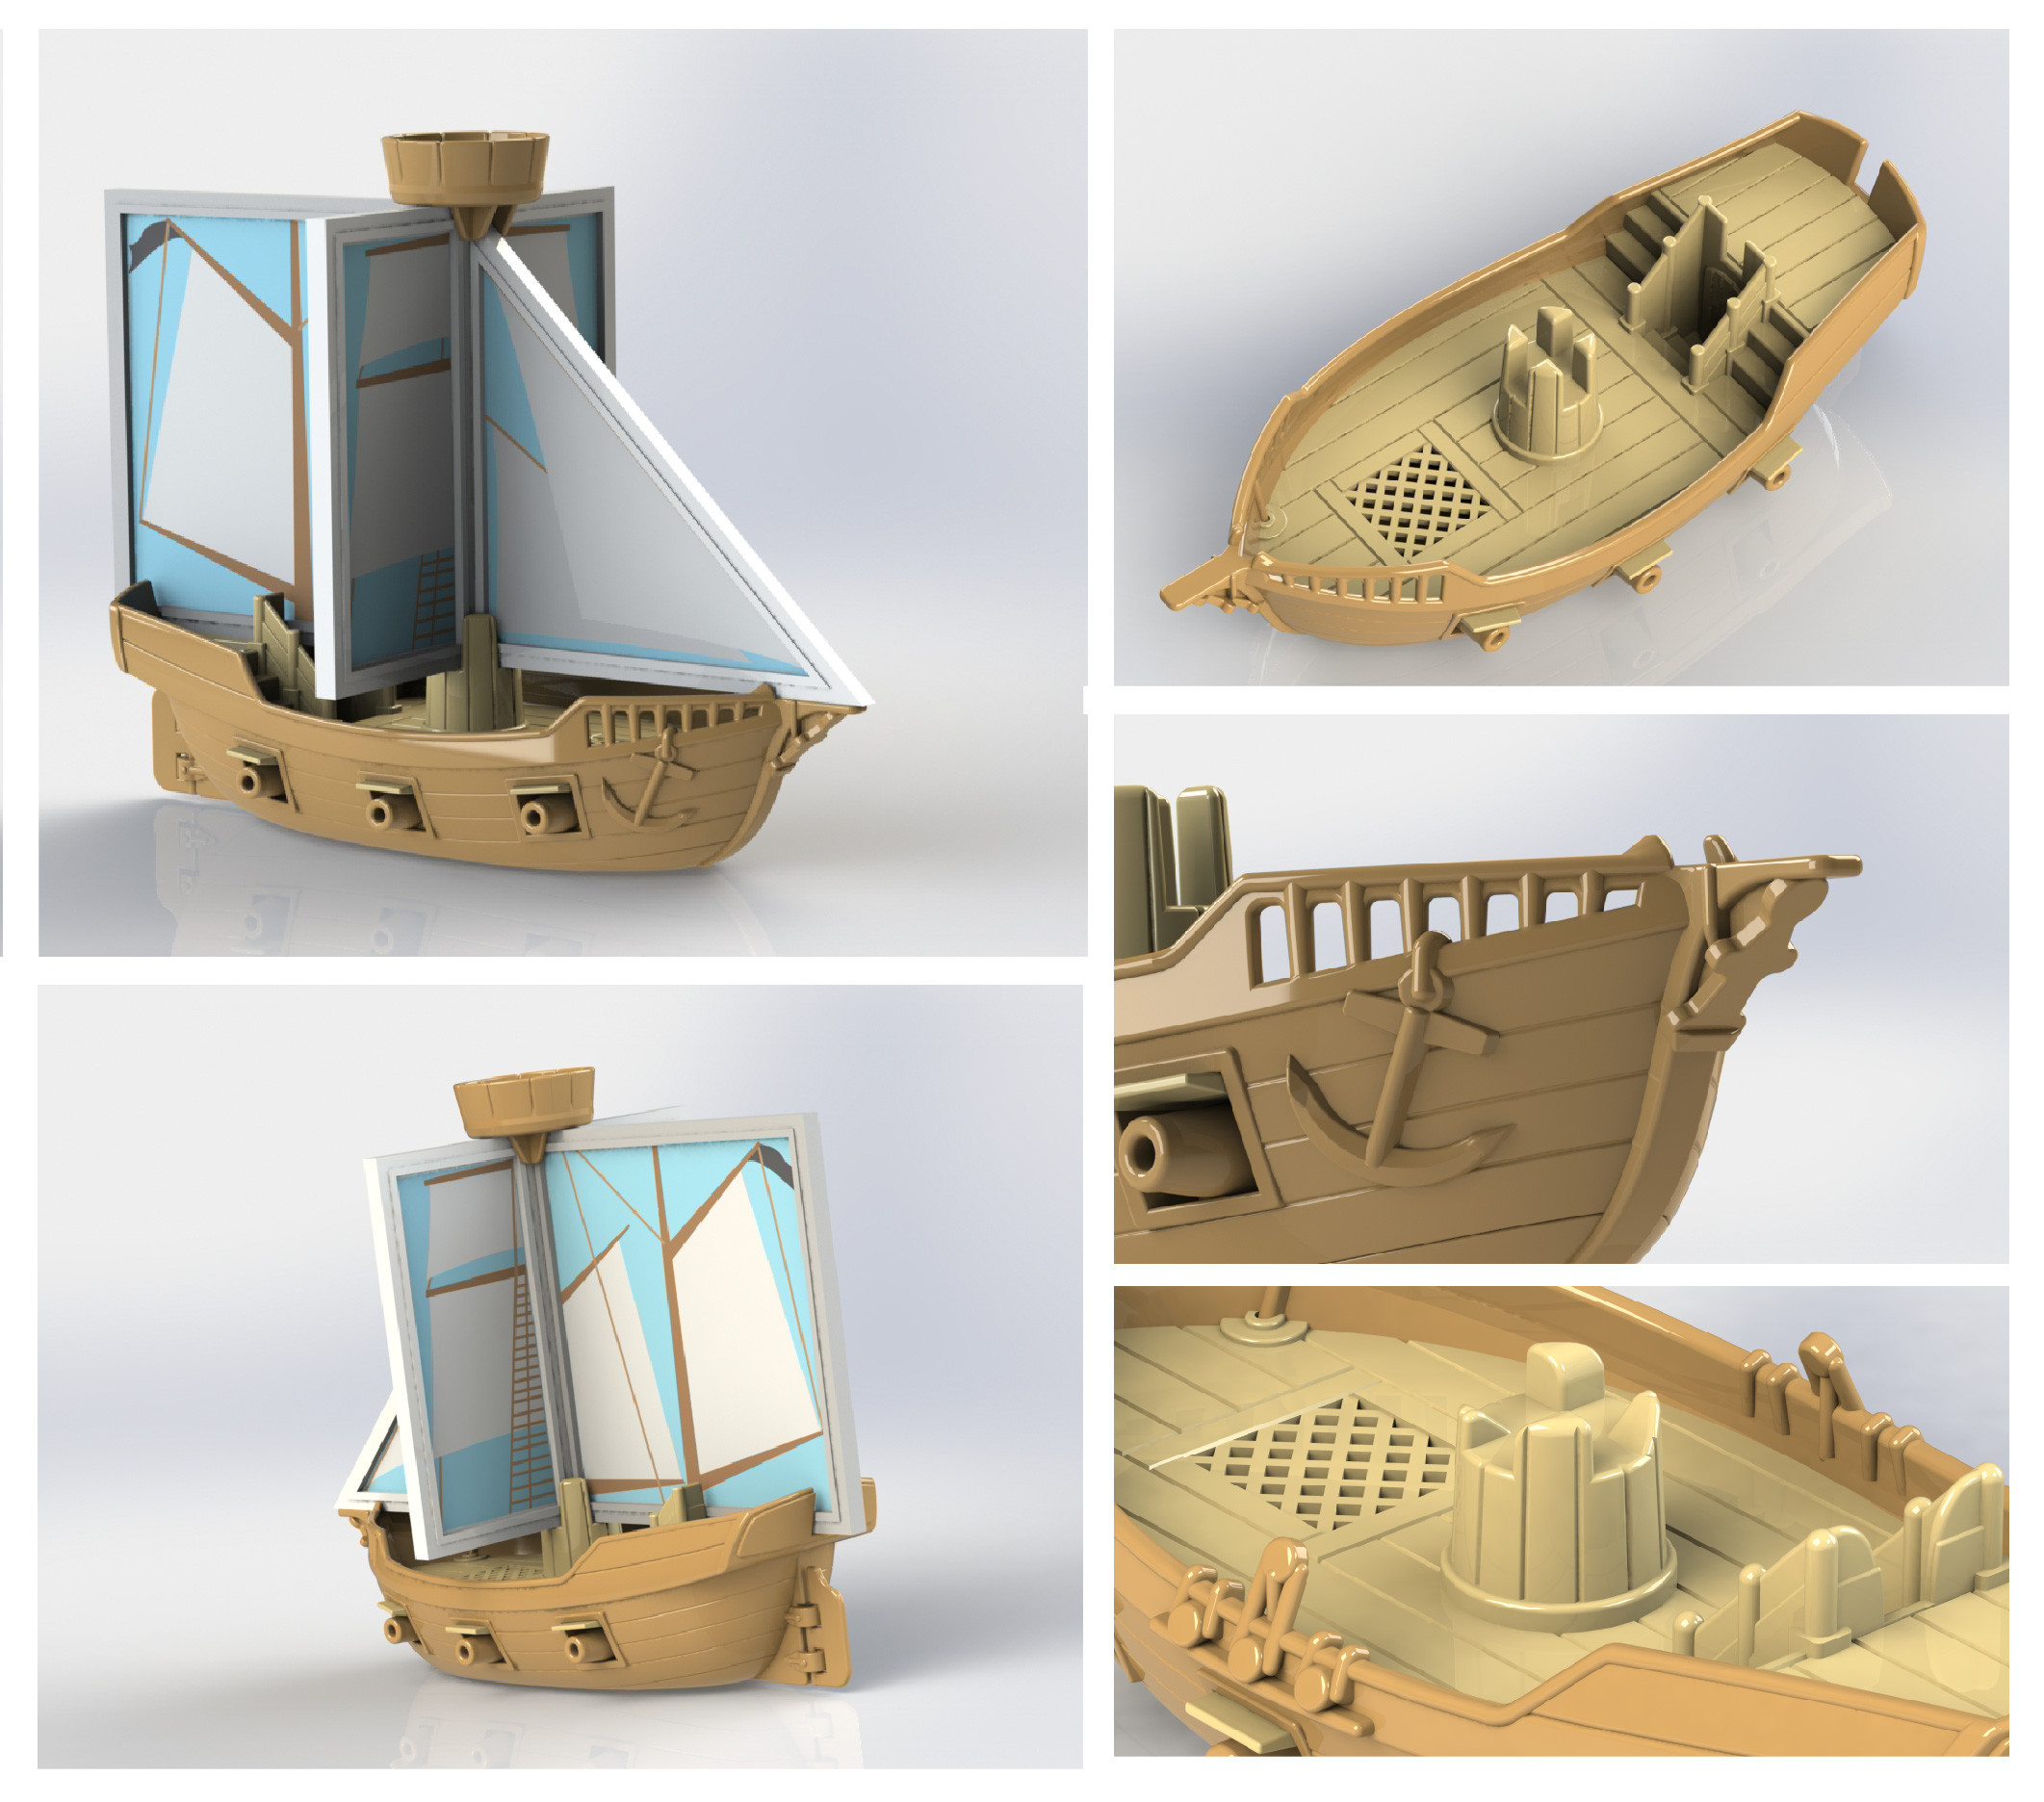 Solidworks renderings of the pirate ship, constructed from 9 pieces: 2 hull sides, the deck (which protrudes through the hull sides to form gunport covers), a movable rudder, crow's nest, and 4 magnetic panels.